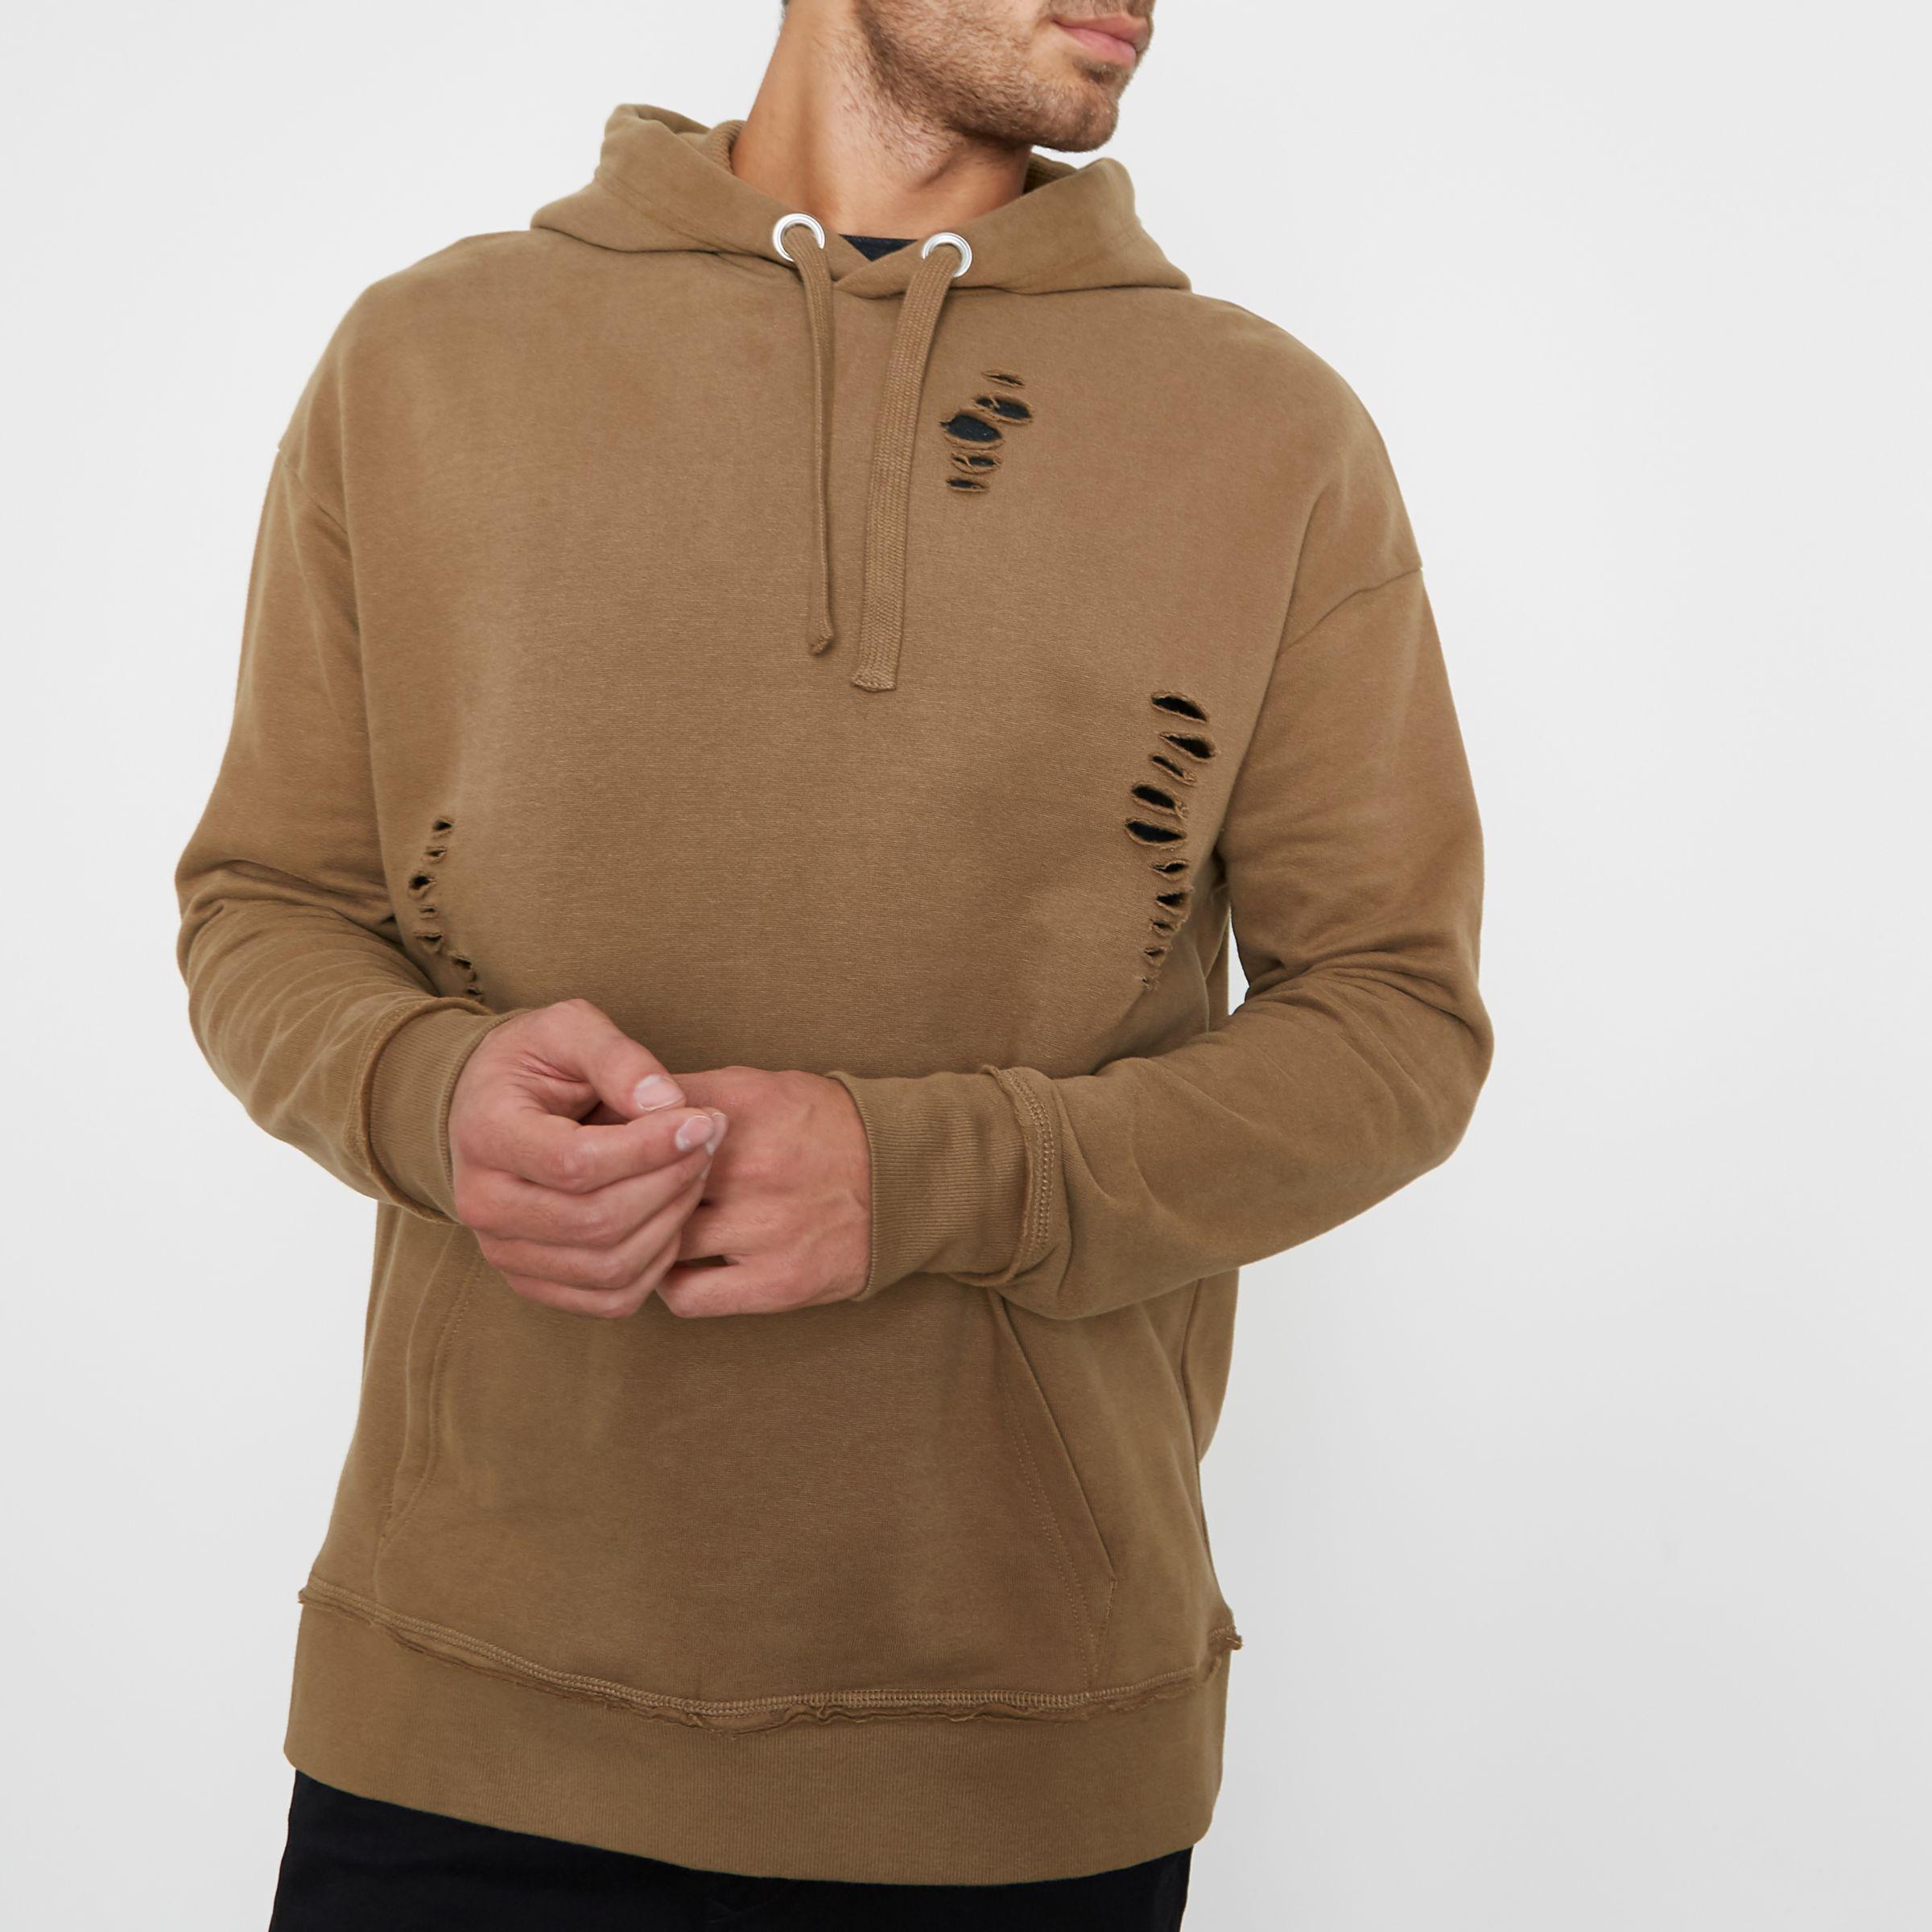 River Island Cotton Tan Ripped Oversized Hoodie in Brown for Men - Lyst